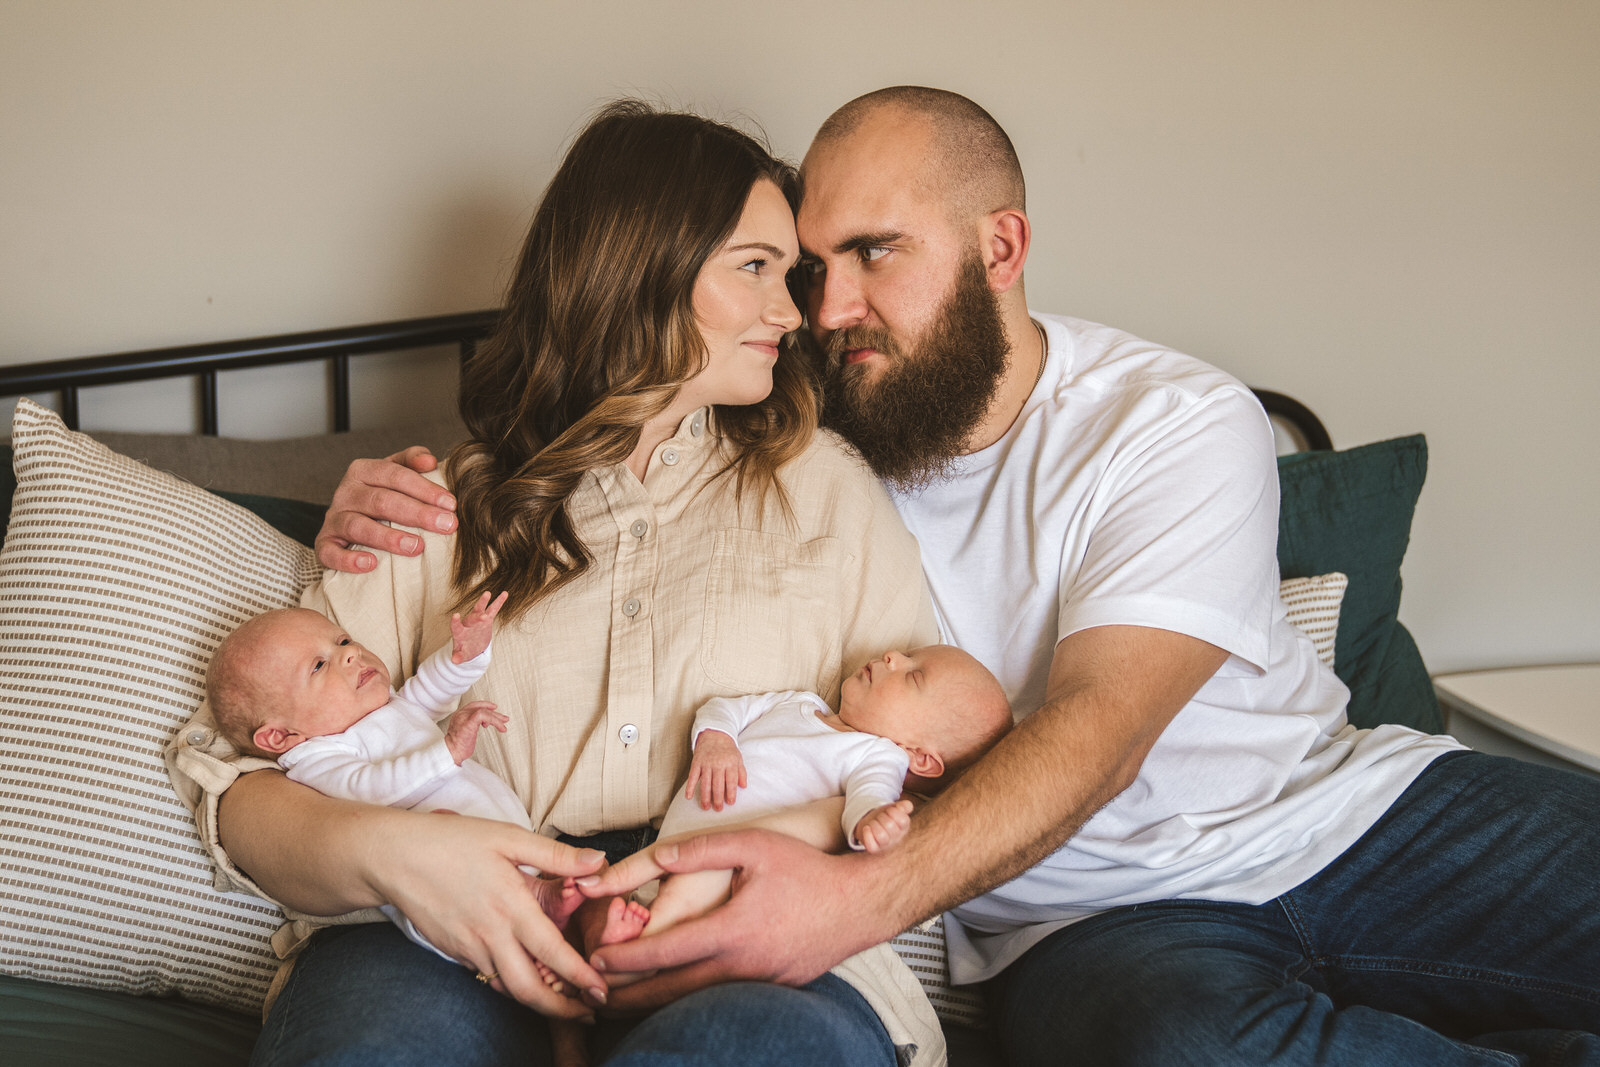 newborn twins photos with mom and dad sitting on bed together